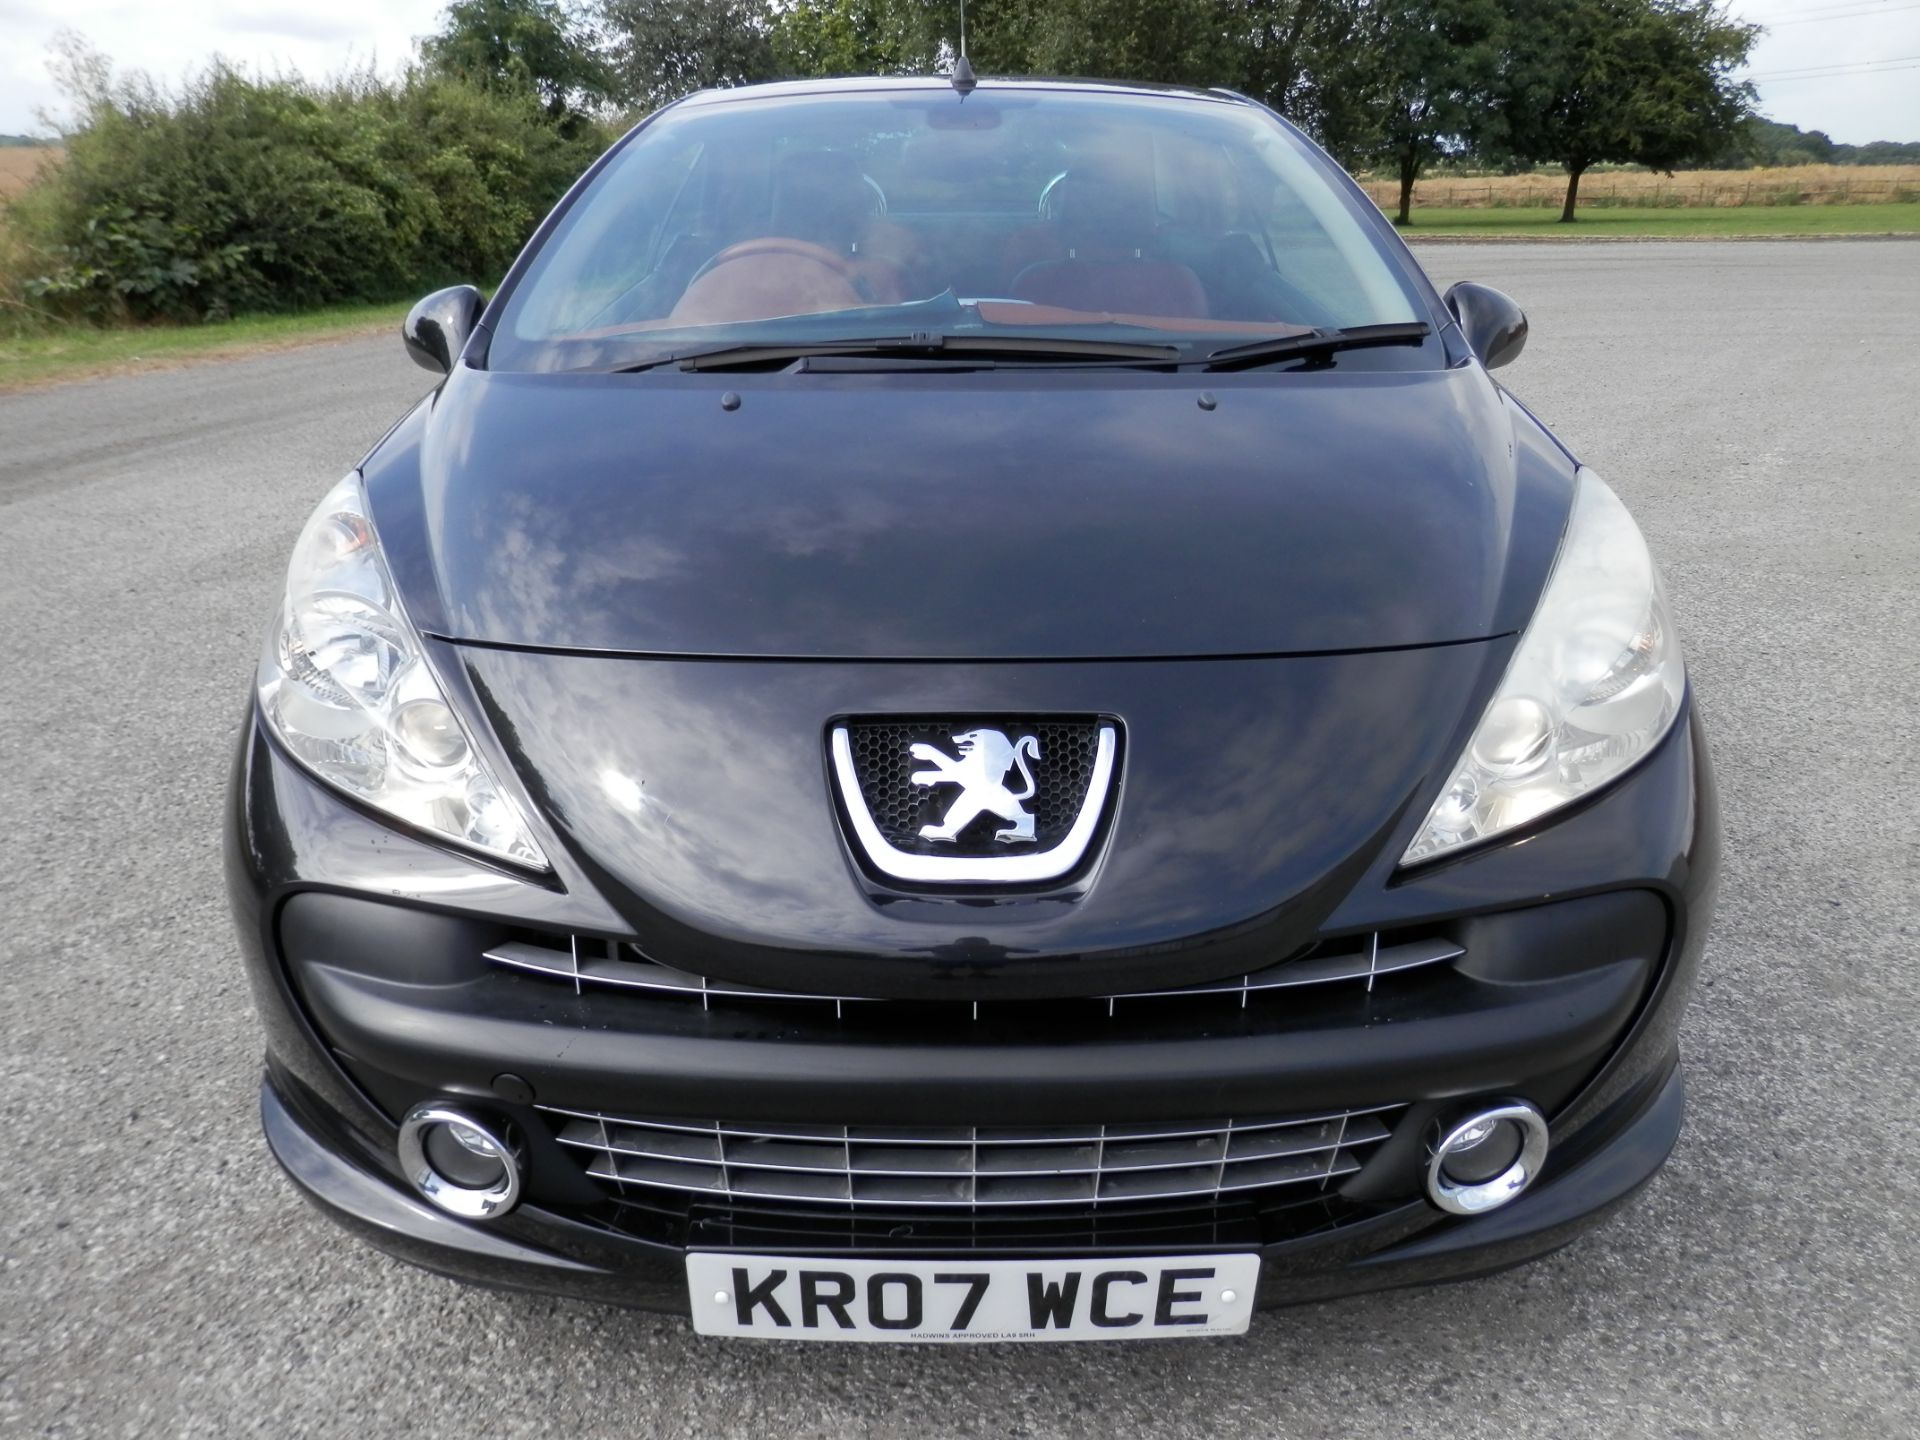 2007/07 PEUGEOT 207 COUPE CABRIOLET - 1.6 16V GT THP 2dr, WITH 2 TONE BLACK & READ LEATHER INTERIOR. - Image 2 of 31